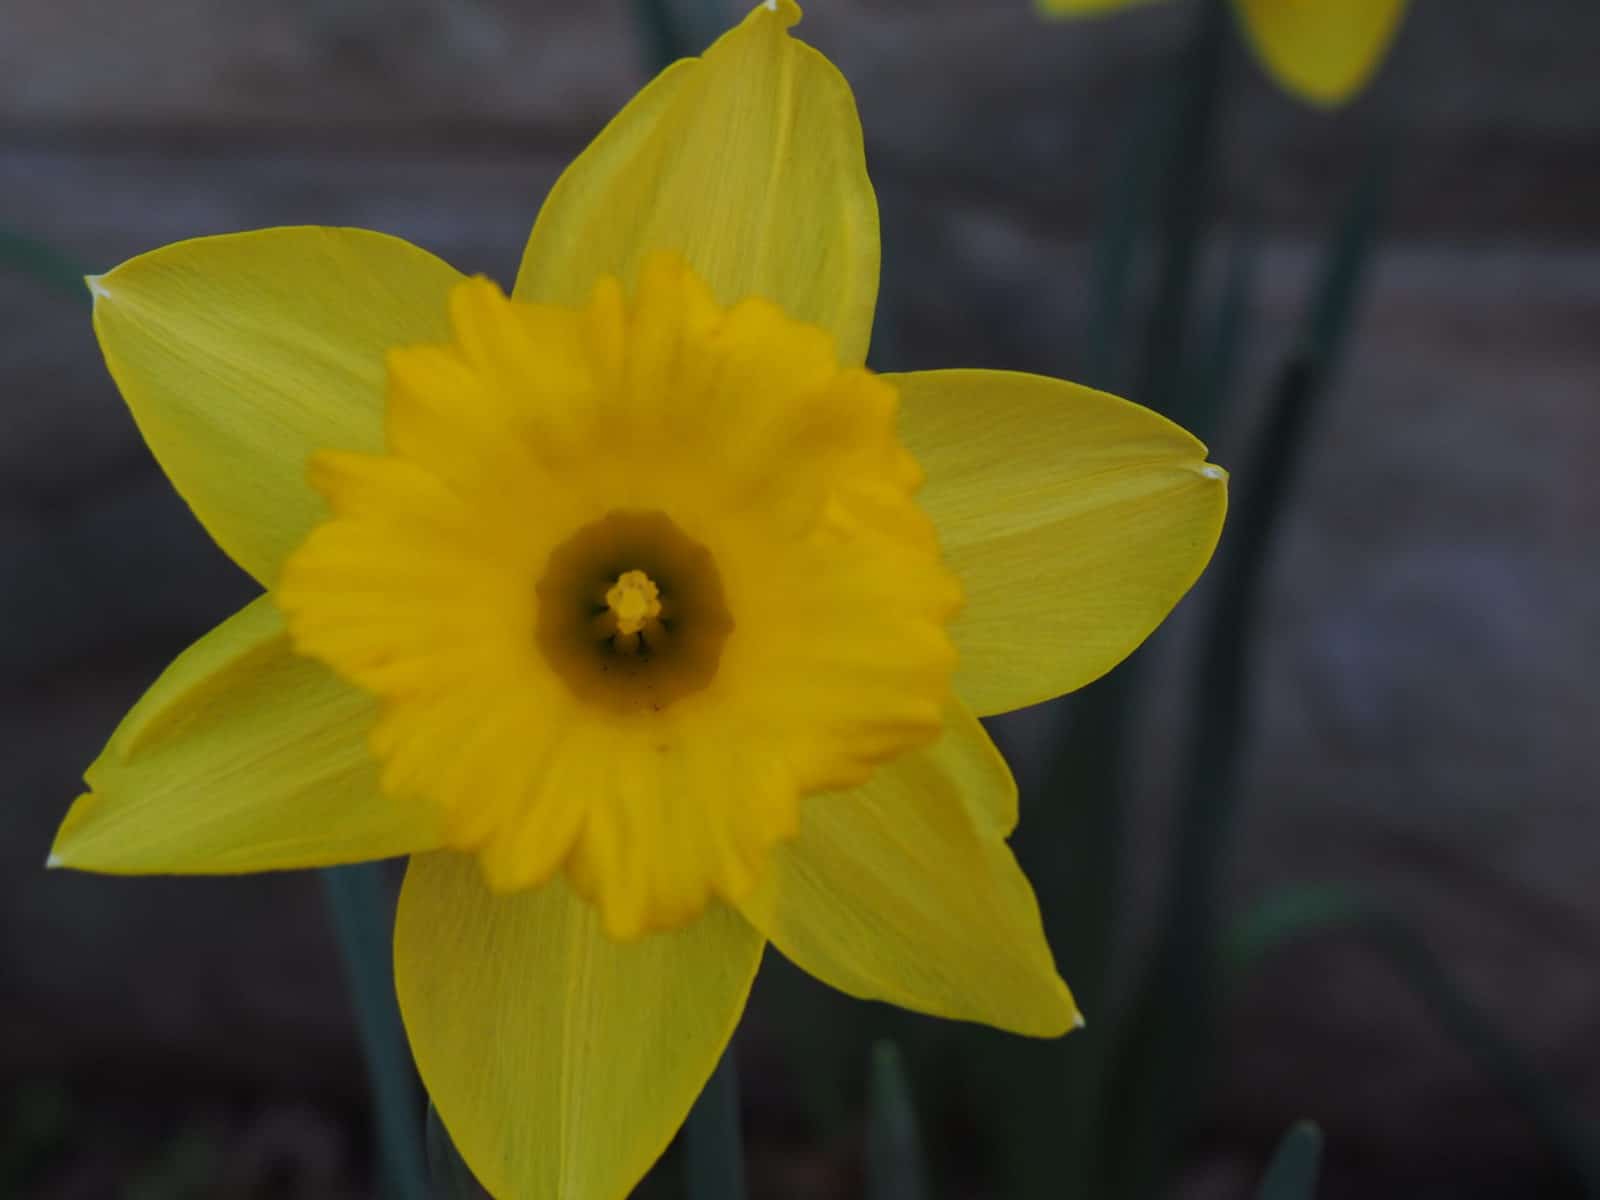 Remembering children who died in the Holocaust: Jewish Center of Princeton participates in the Daffodil Project